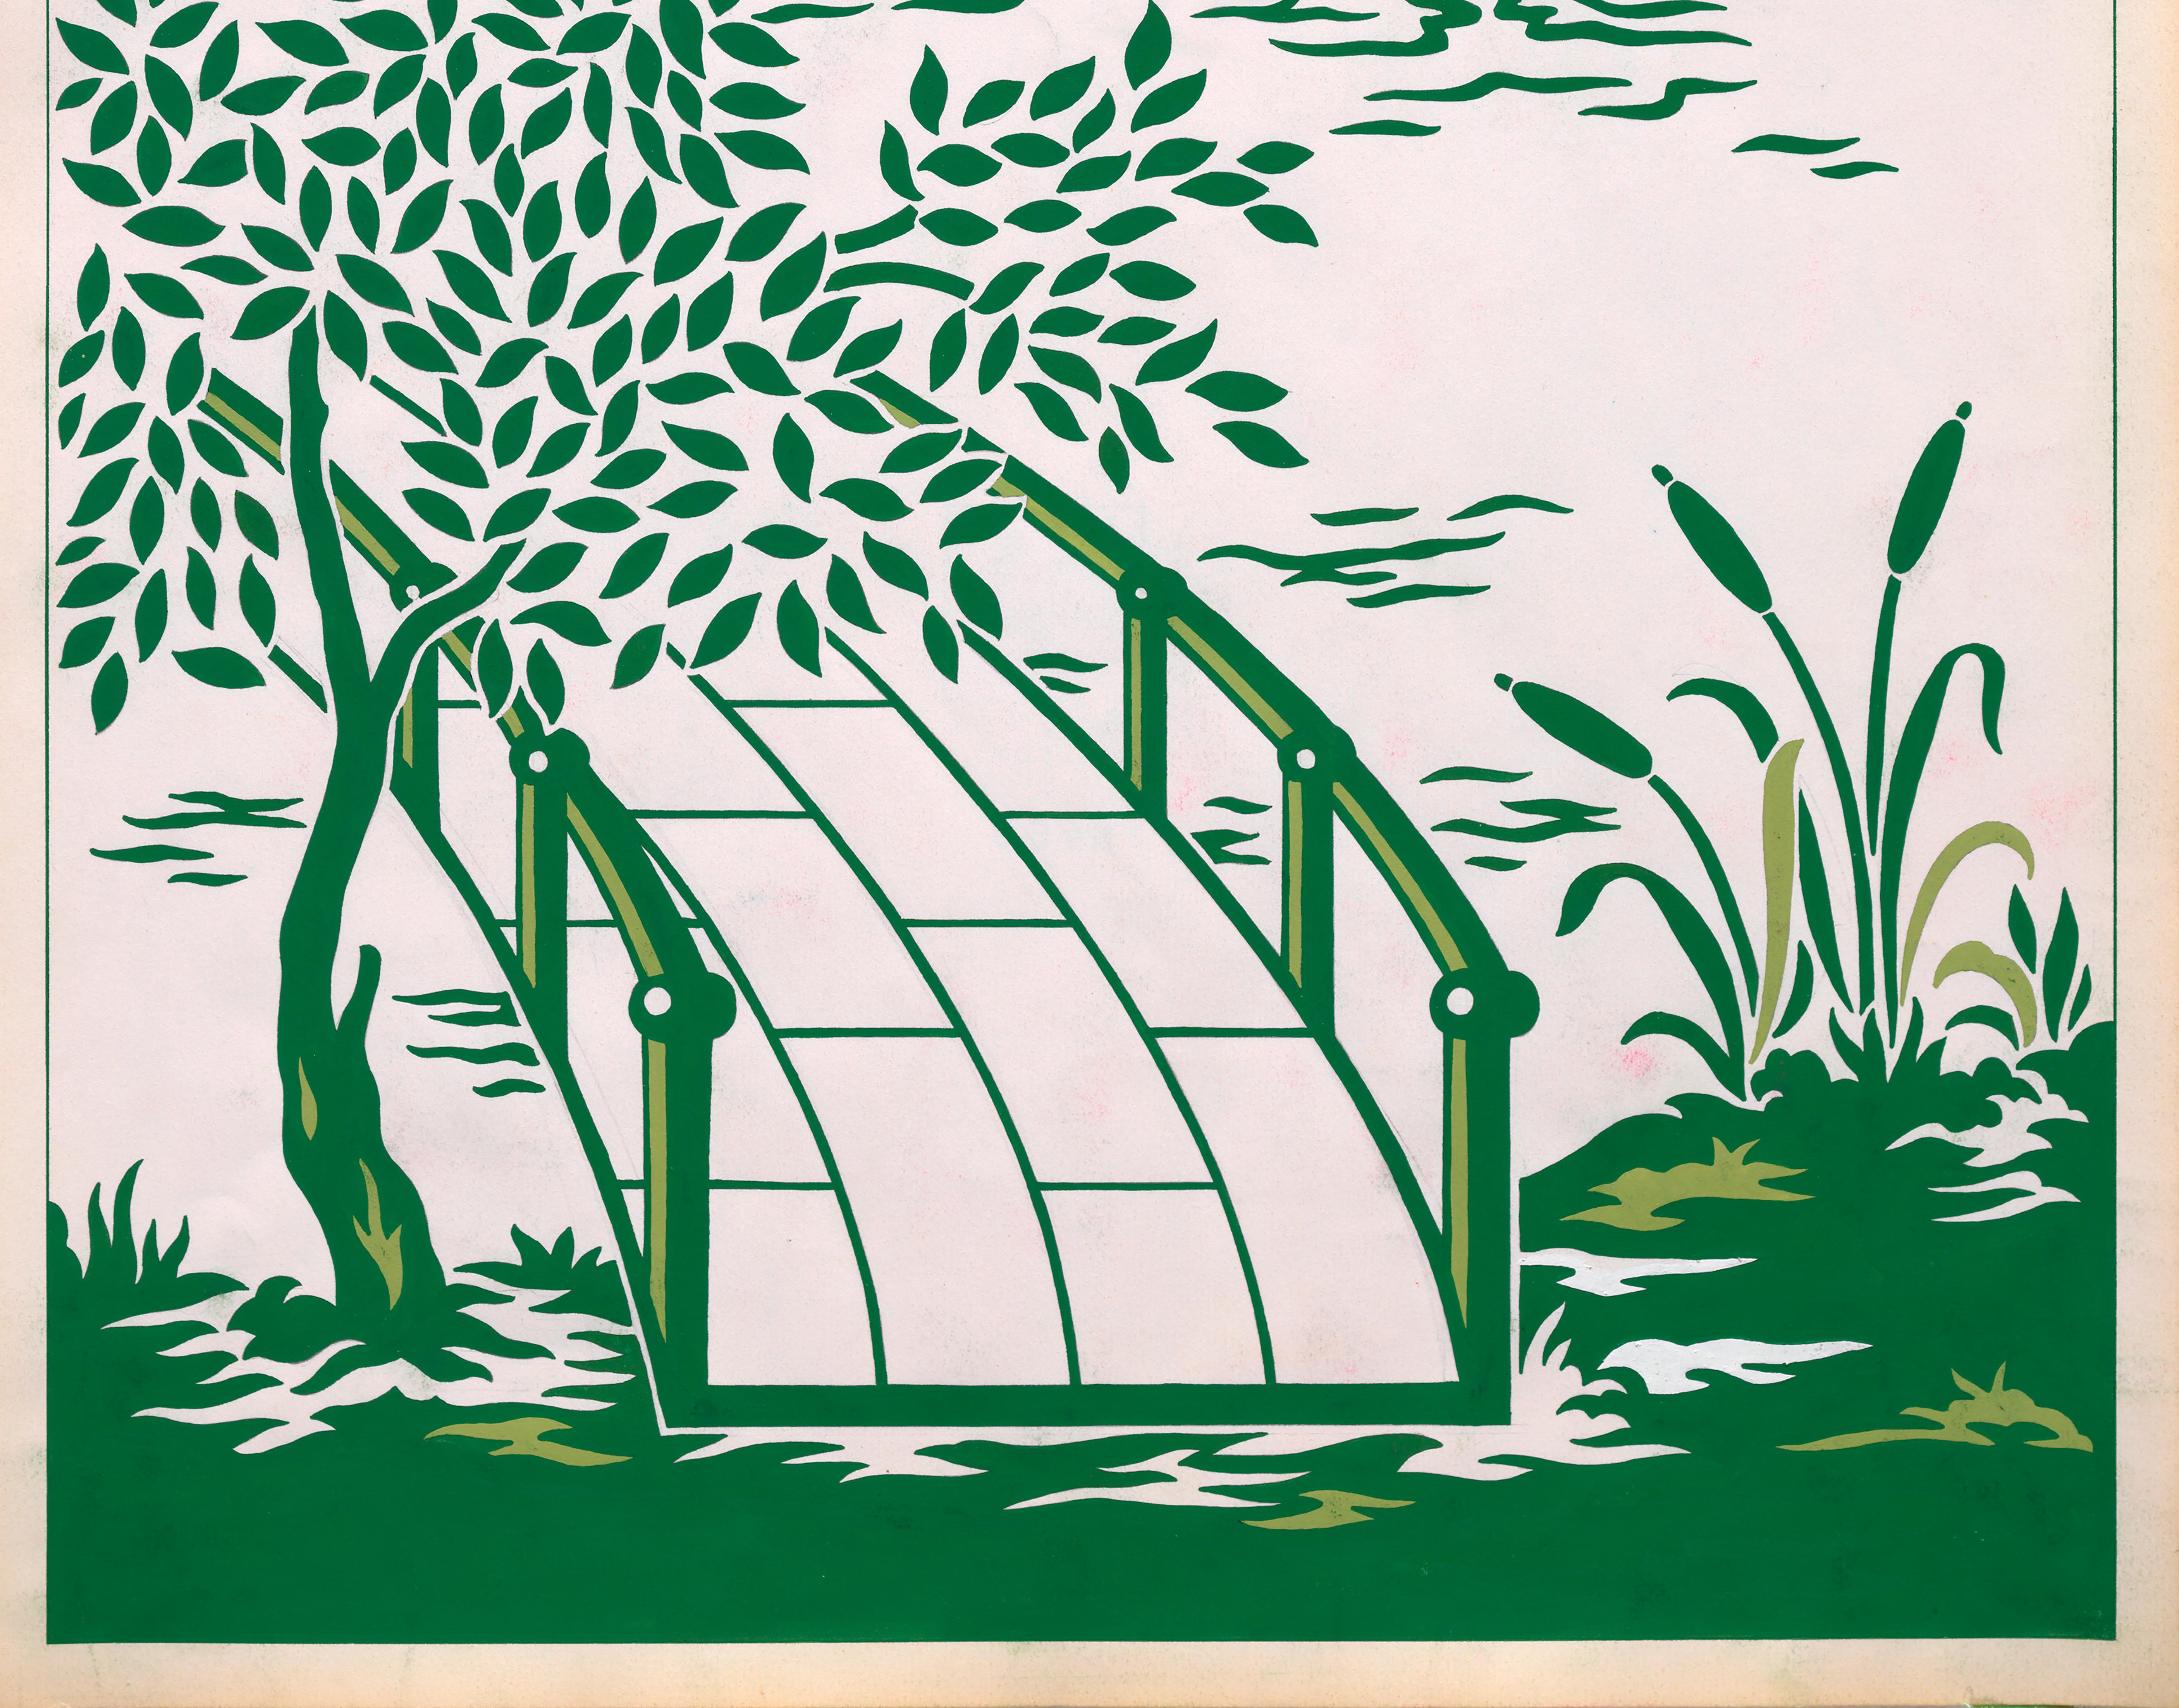 Original 70's Hand Painted Textile Design Gouache Green Shades on White Paper - Beige Landscape Painting by Unknown